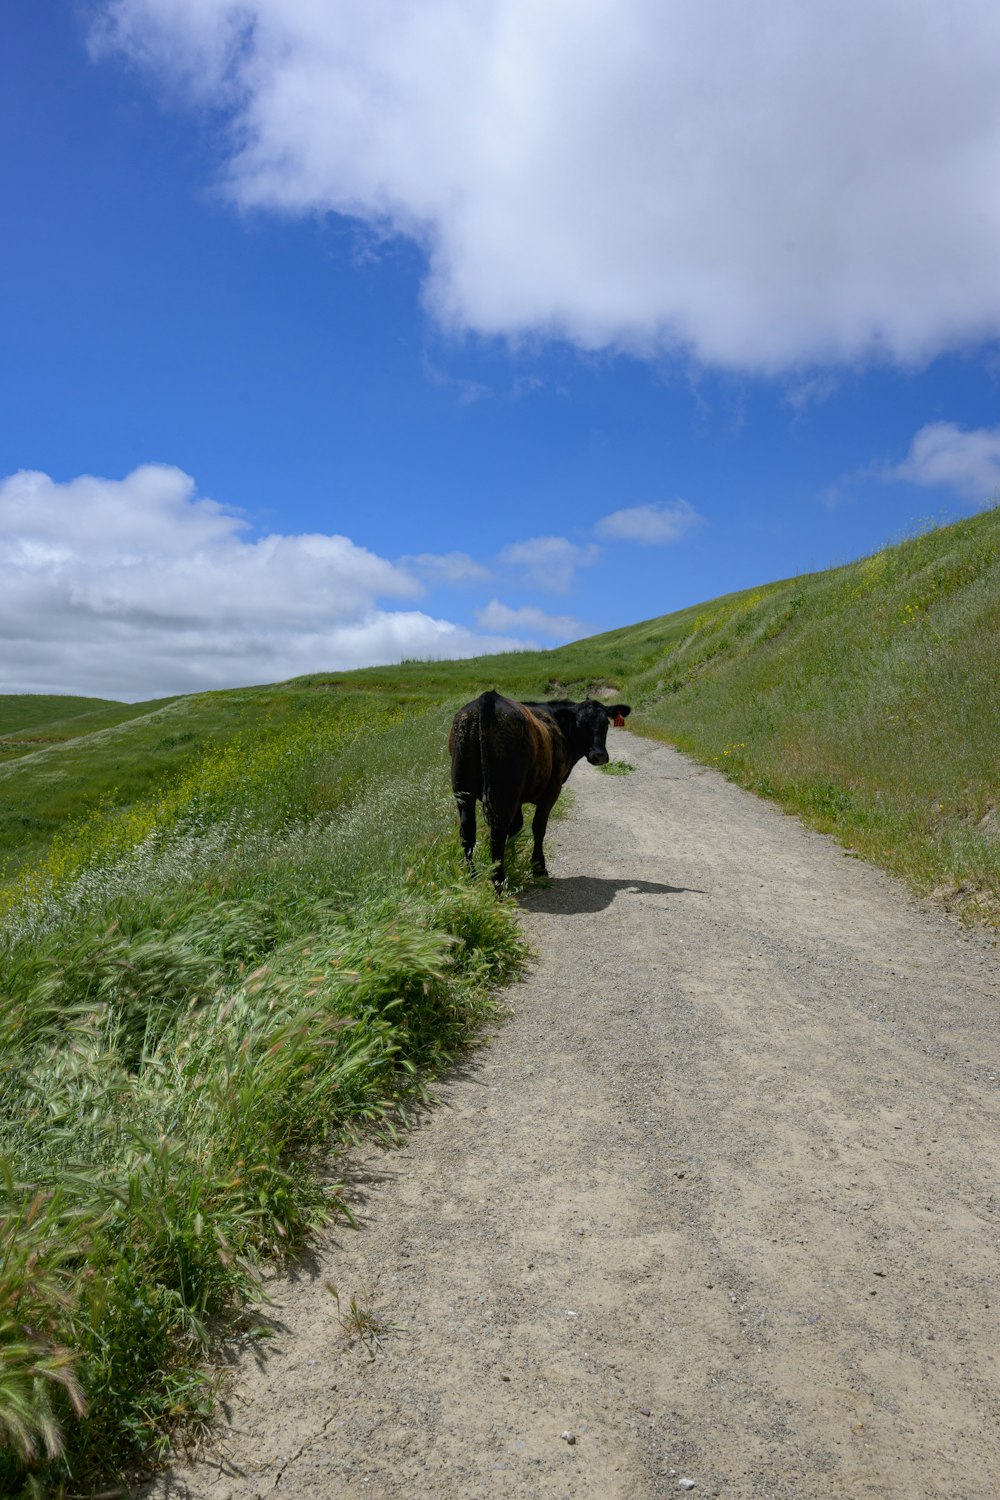 a black cow standing on a dirt road